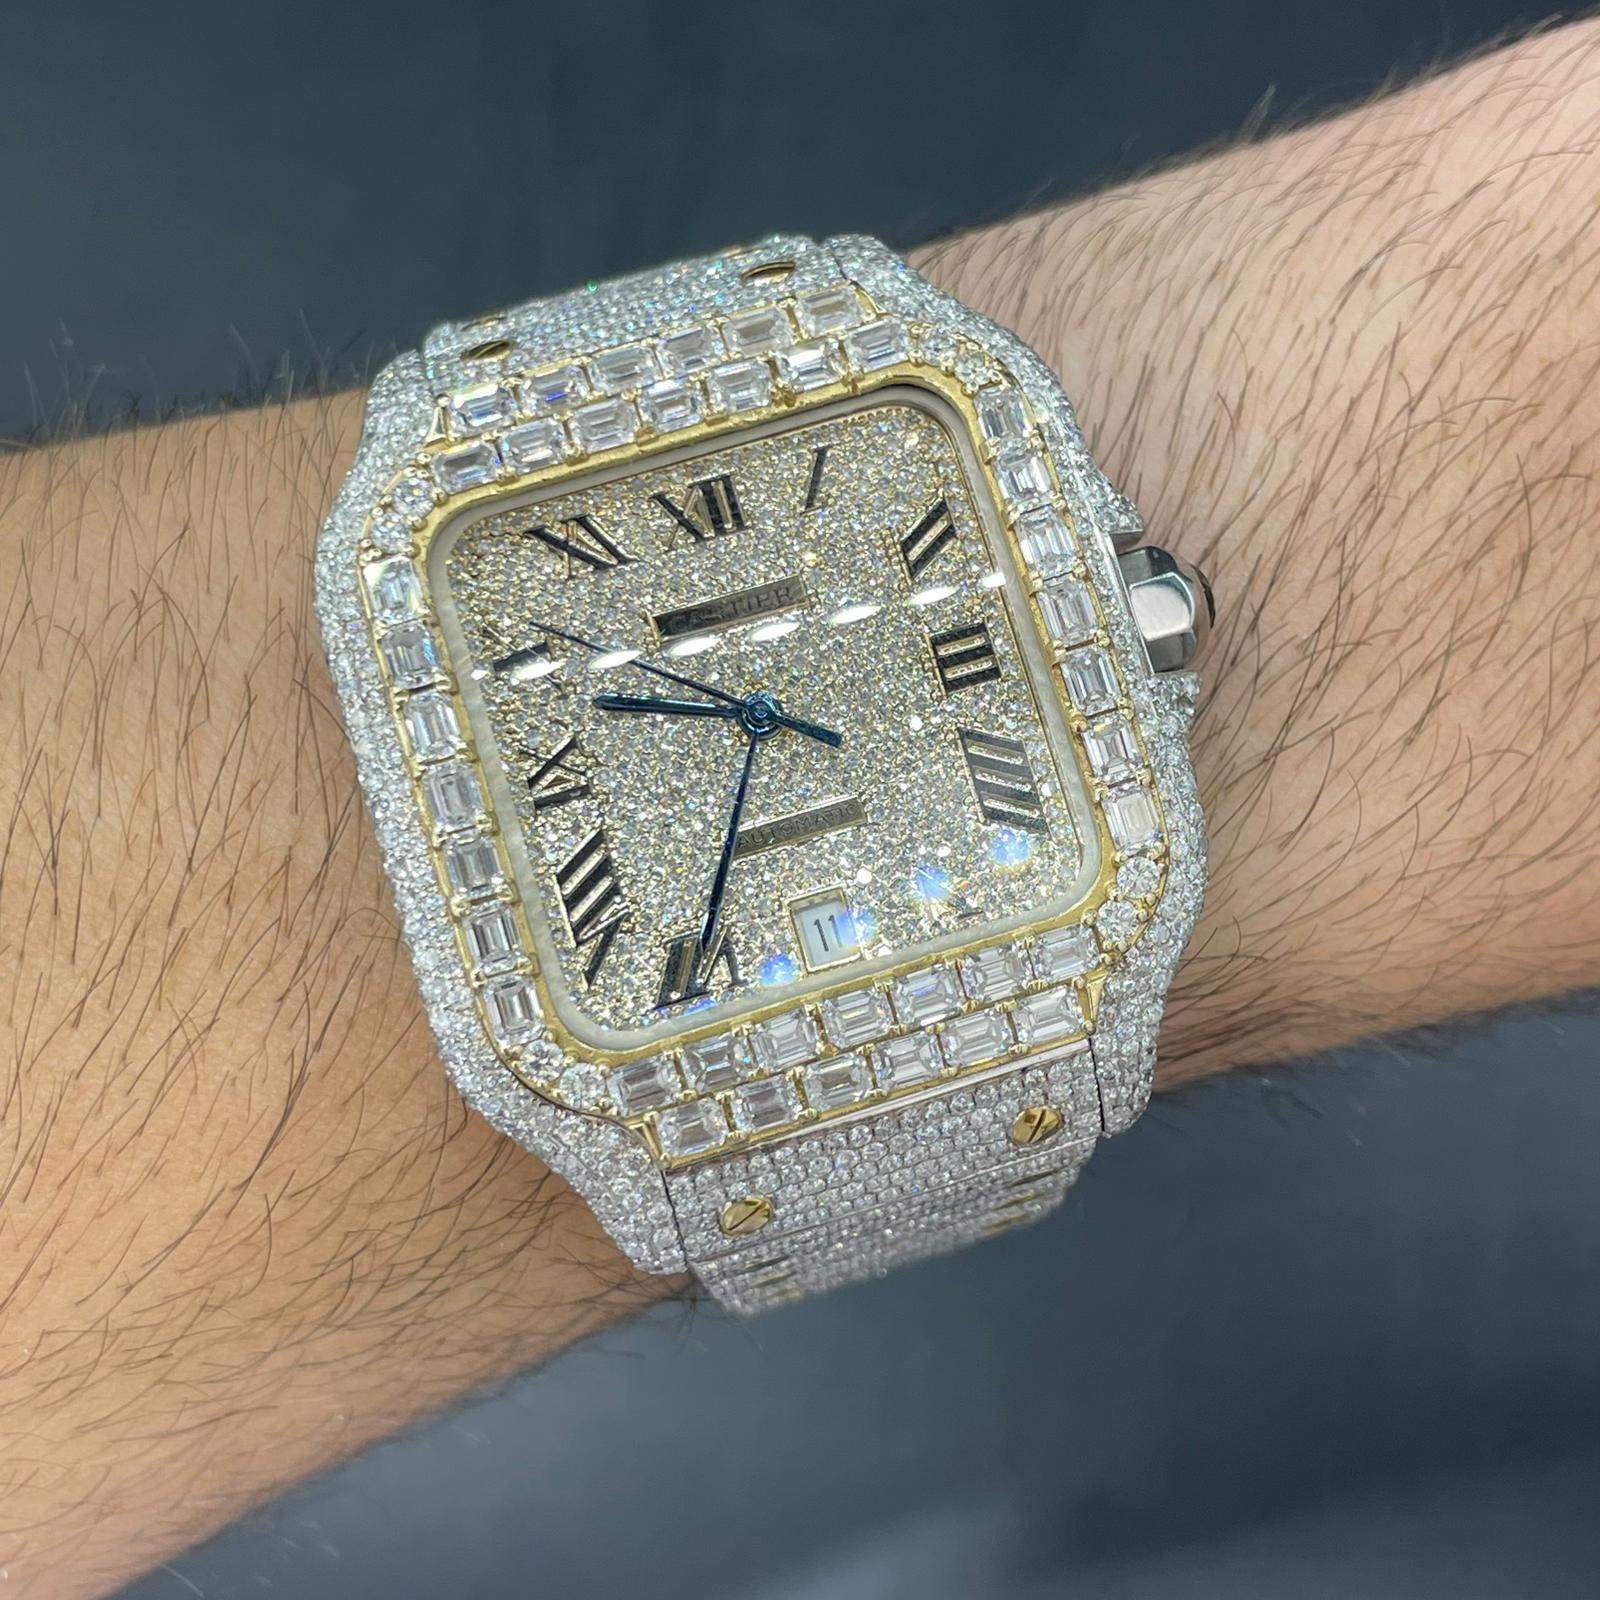  Iced Out Cartier Watch